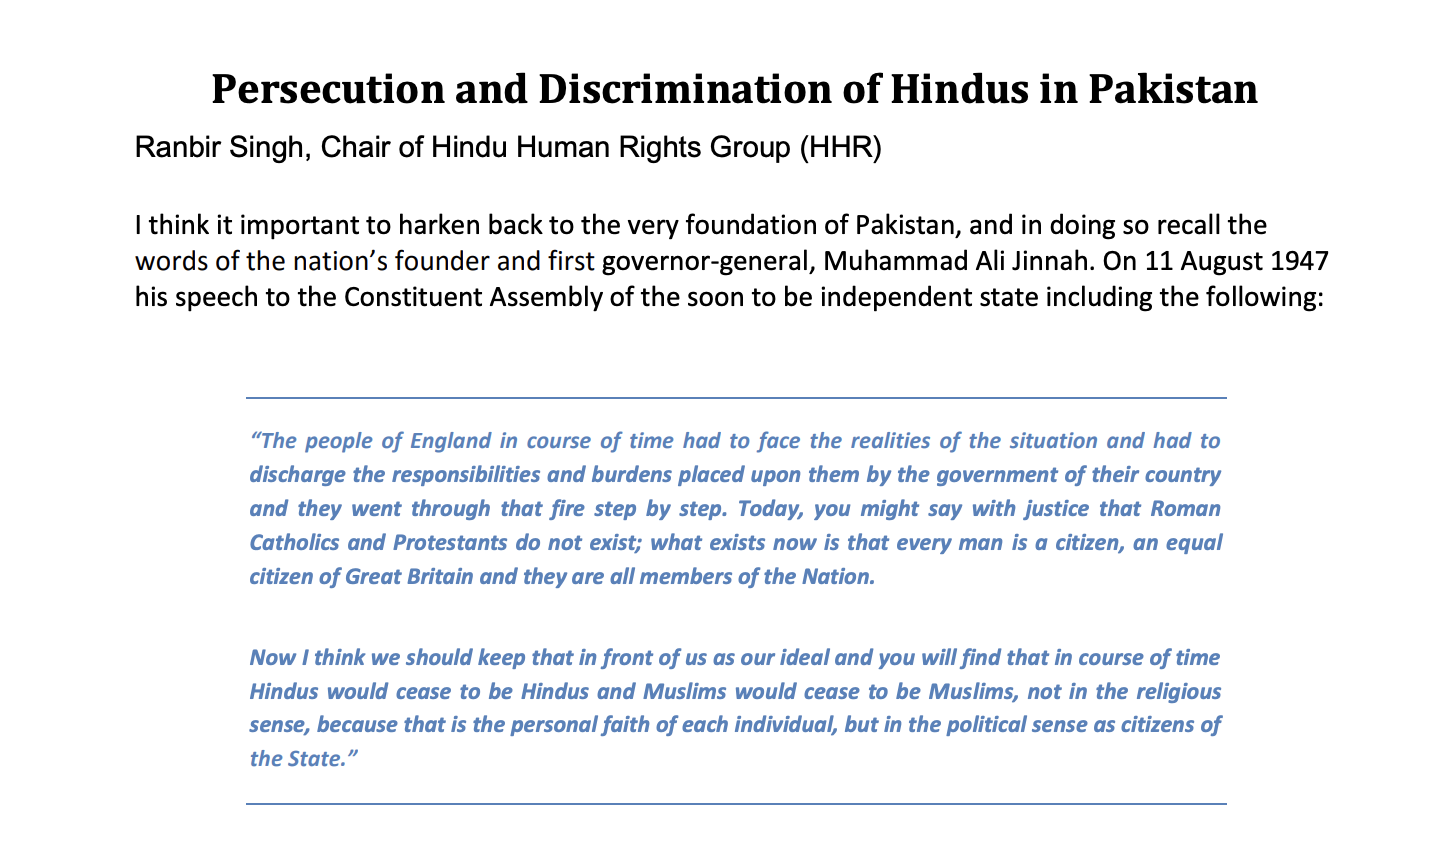 Persecution and Discrimination of Hindus in Pakistan